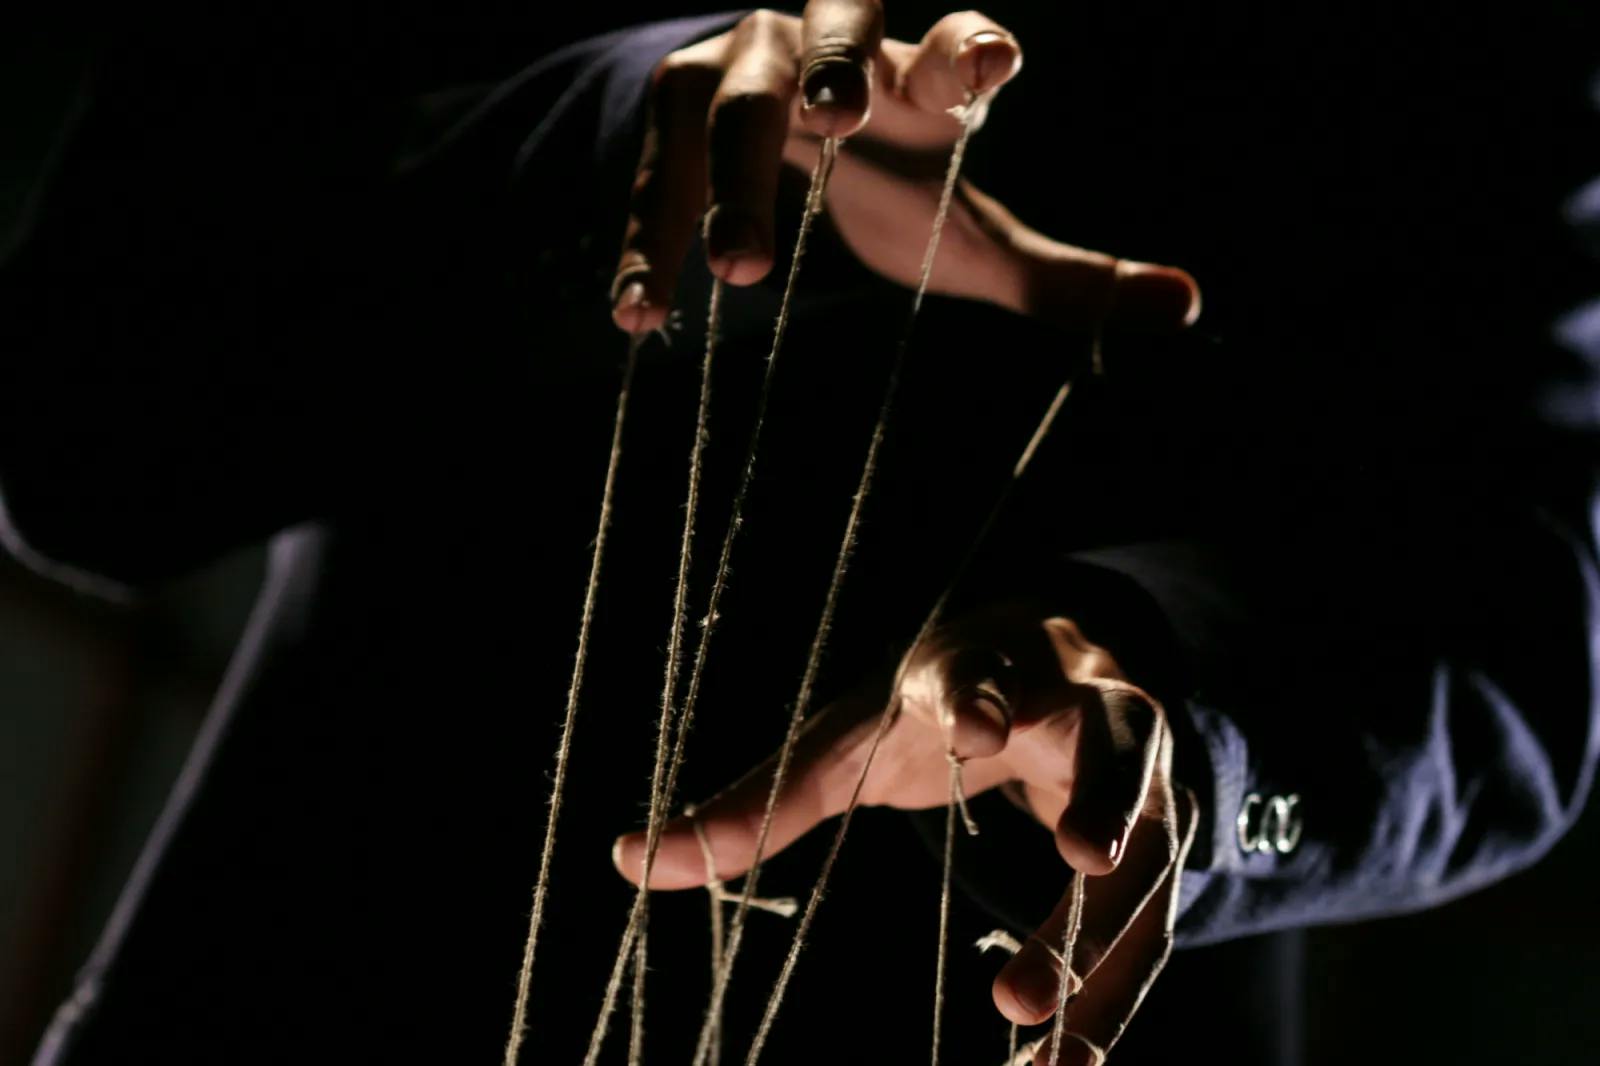 Man with puppet strings